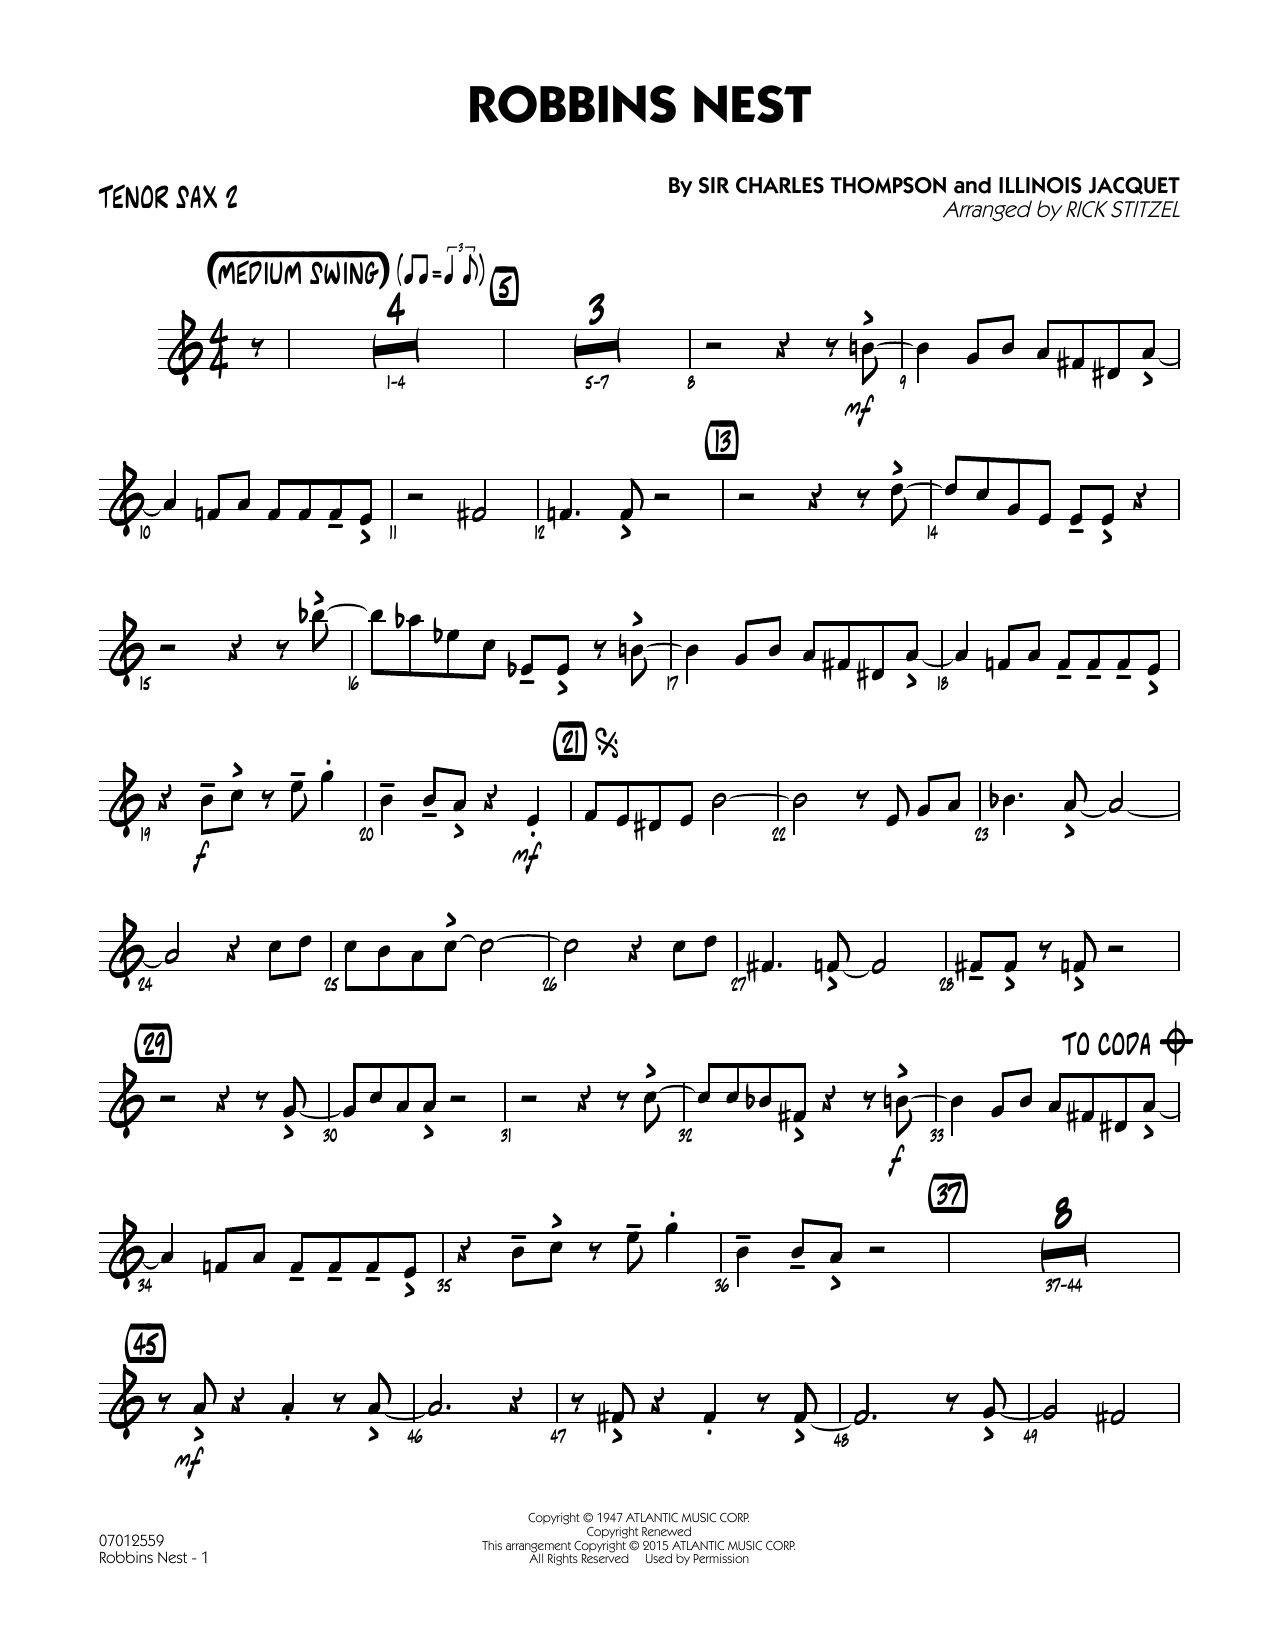 Rick Stitzel Robbins Nest - Tenor Sax 2 sheet music notes and chords. Download Printable PDF.